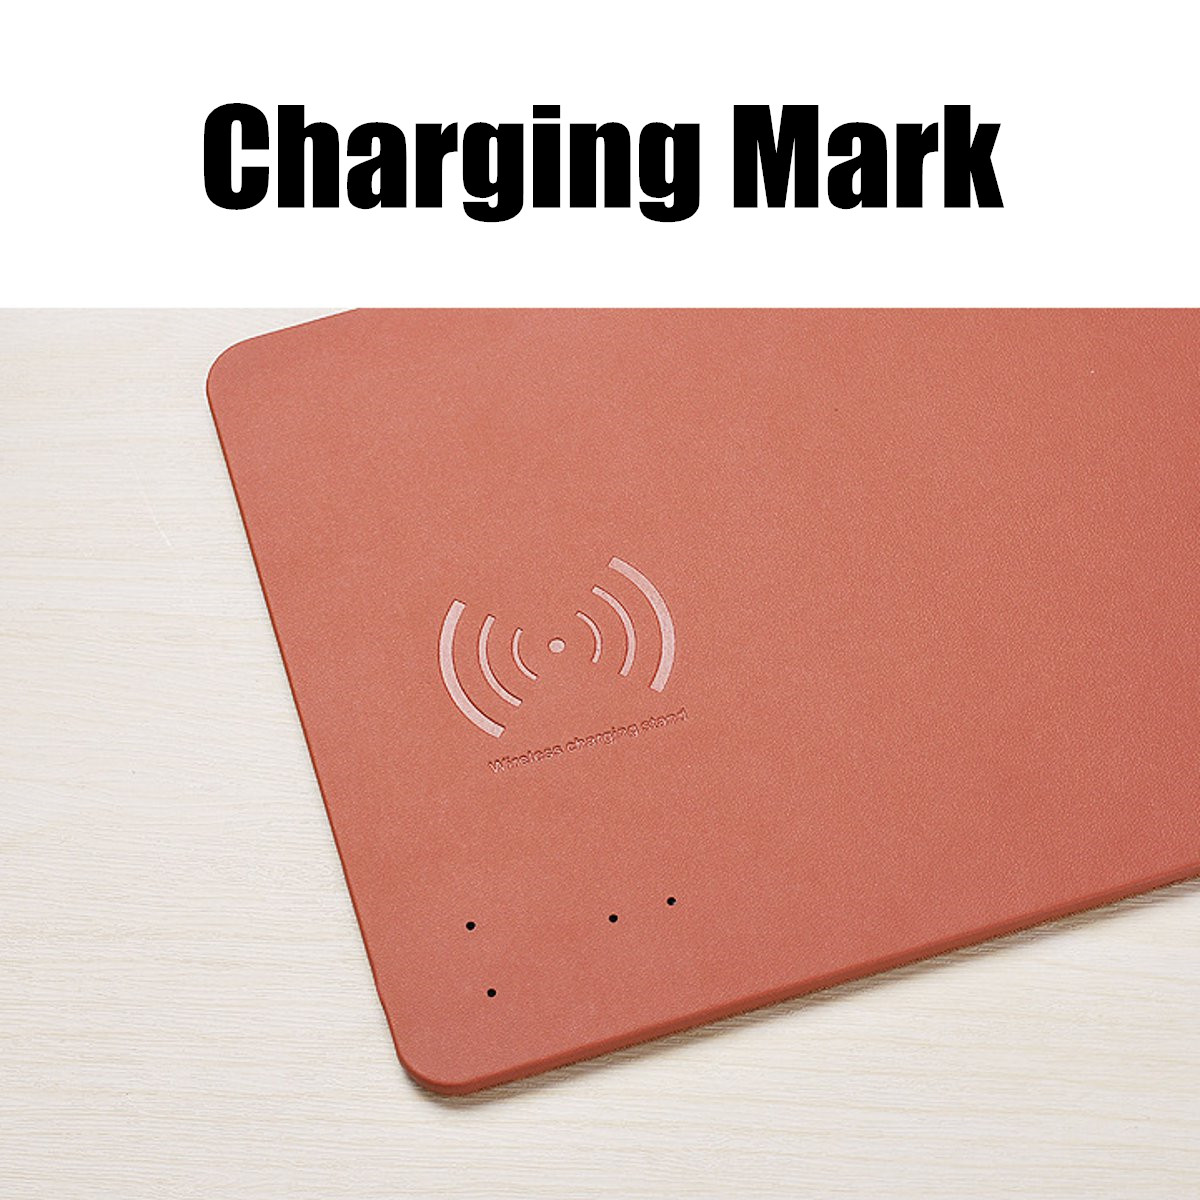 Imitation Leather Mobile Phones Wireless Fast Charger Mouse Pad Qi Wireless Charging 12